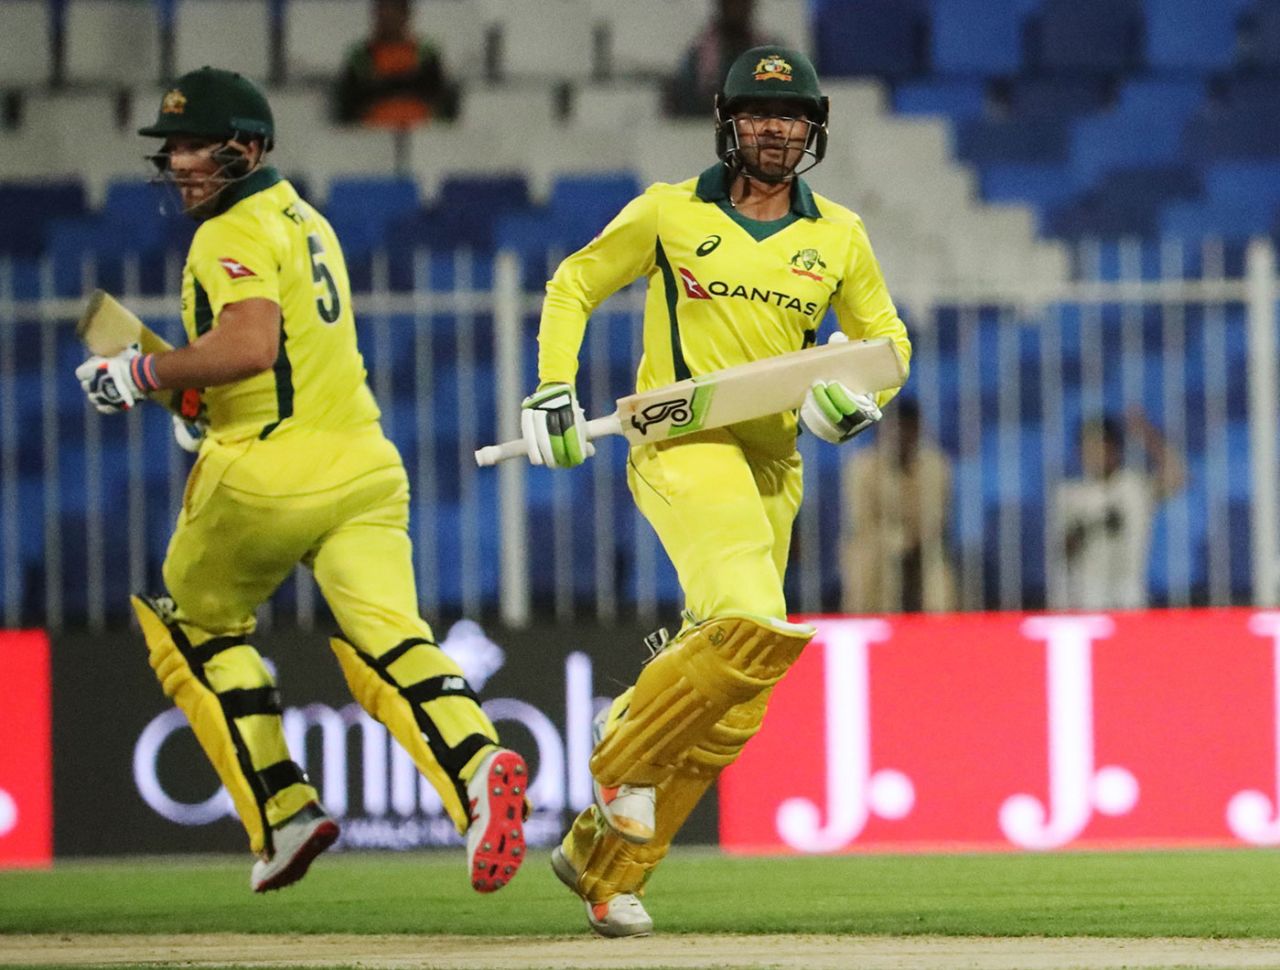 Aaron Finch and Usman Khawaja added a double-century opening stand, Pakistan v Australia, 2nd ODI, Sharjah, March 24, 2019